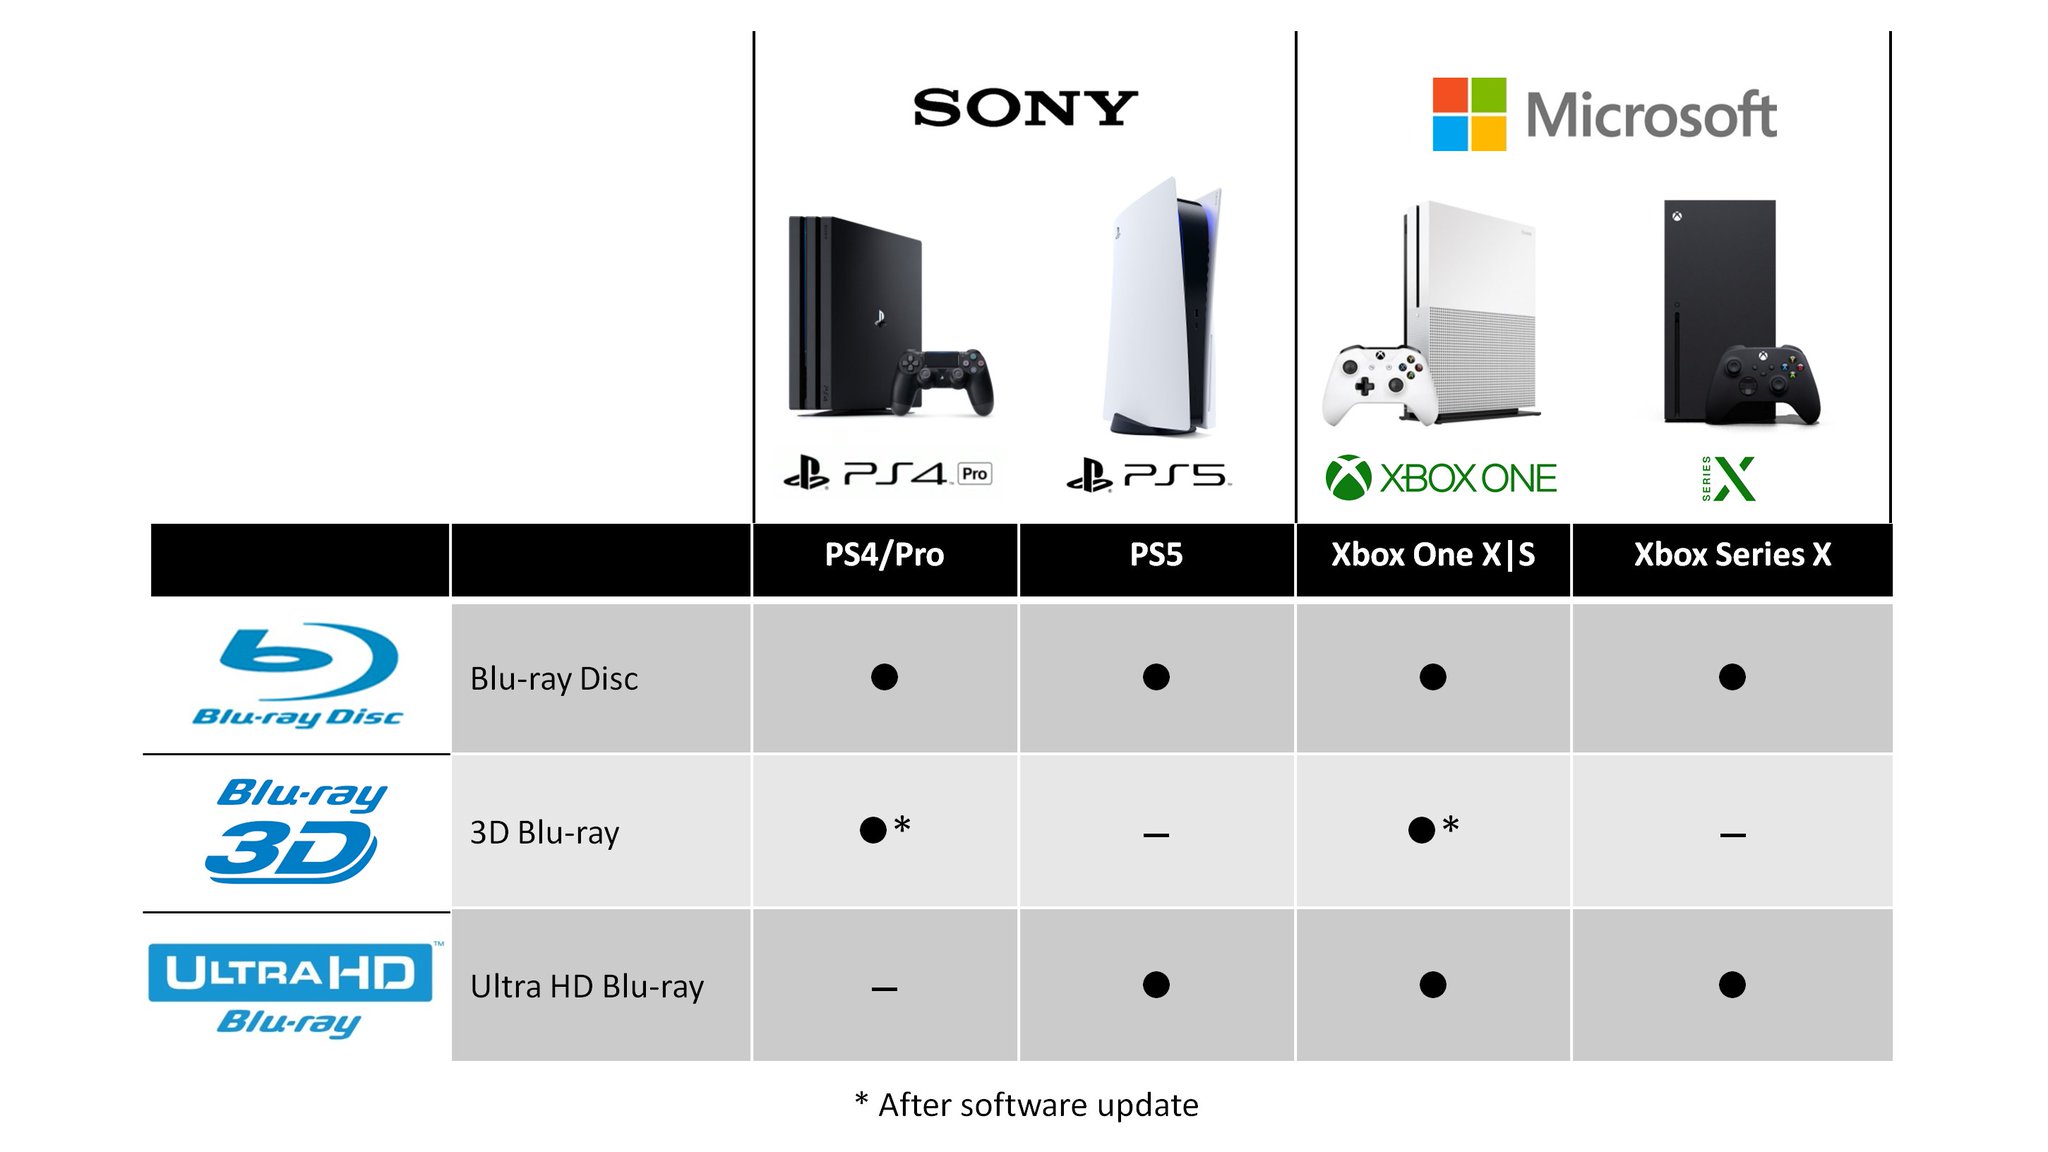 Herstellen staart Componeren Ultra HD Blu-ray 💿 on Twitter: "Neither of the new consoles currently  supports 3D Blu-ray. It's possible that it gets added to PS5 and/or Xbox  Series X via a software update –